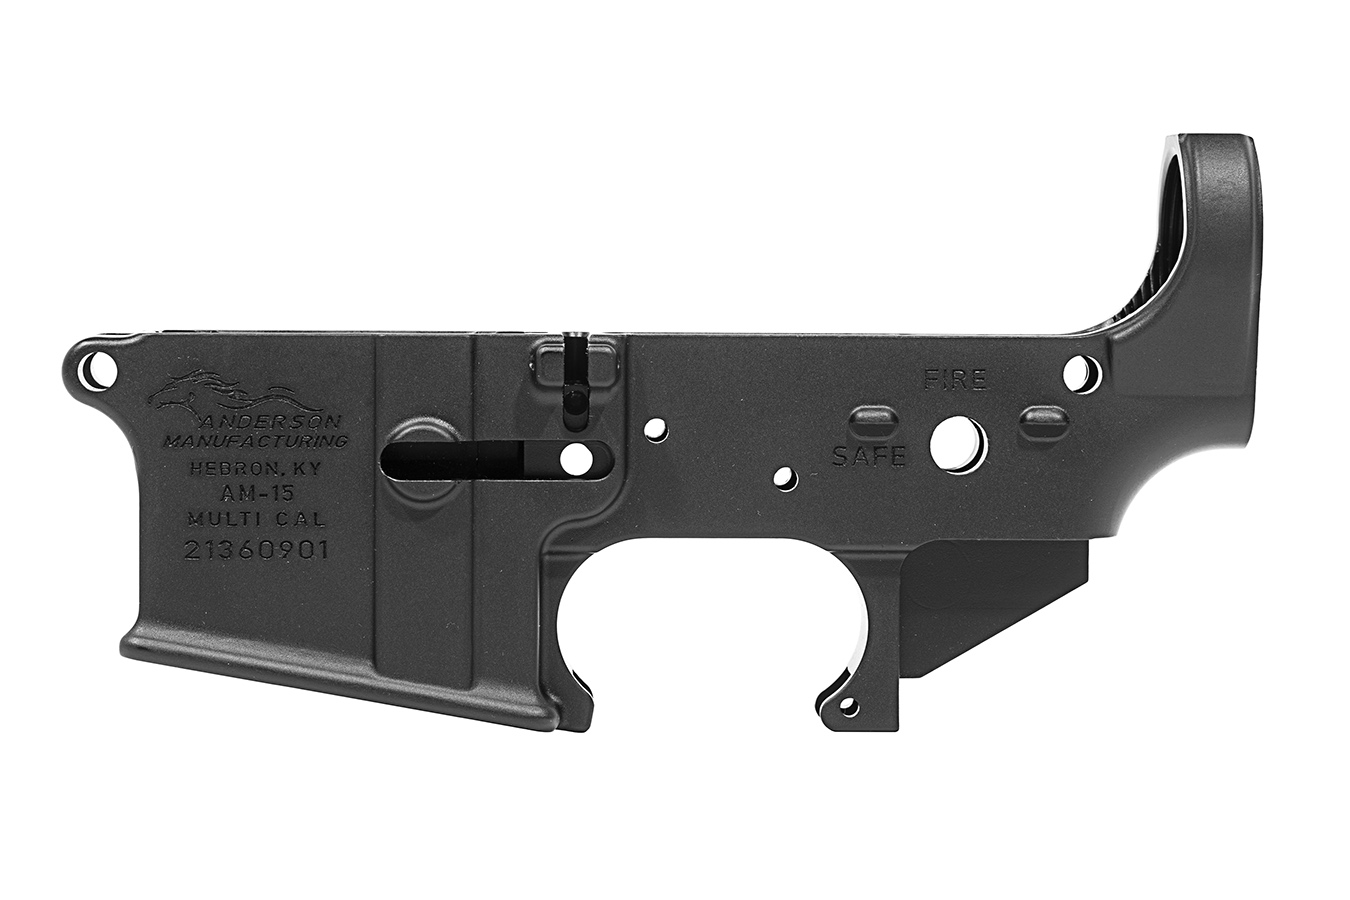 No. 3 Best Selling: ANDERSON MANUFACTURING AM-15 STRIPPED LOWER RECEIVER (MULTI CAL)